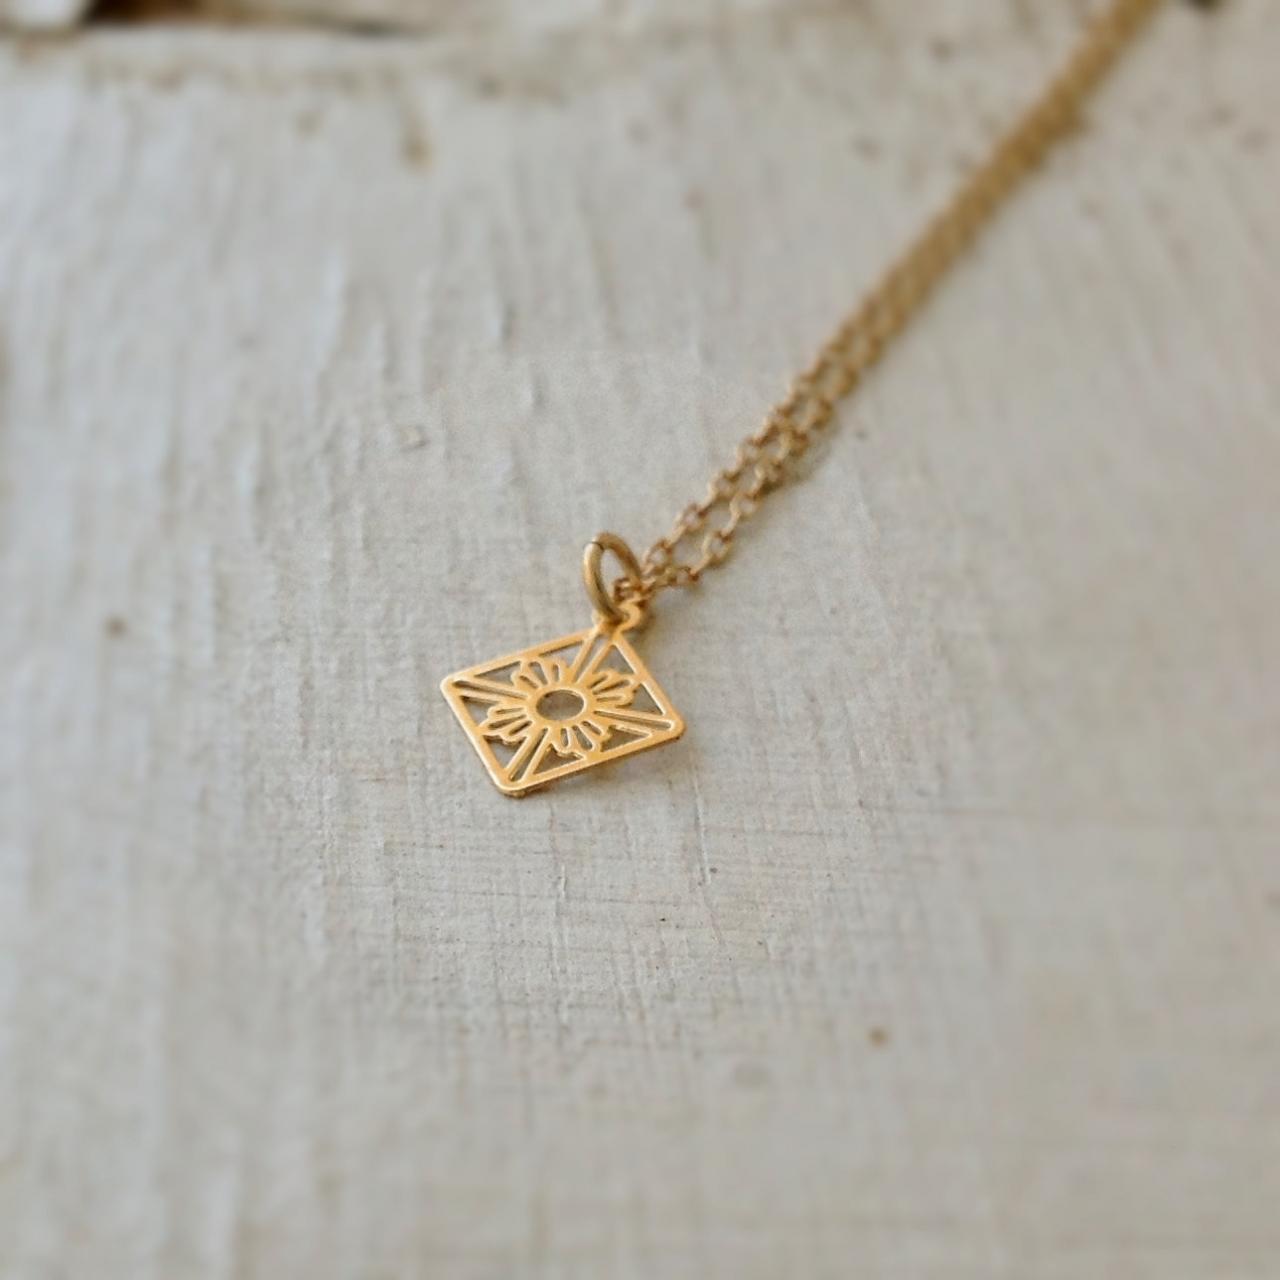 Gold Necklace, Tiny Necklace, Simple Necklace, Tiny Gold Necklace, Petite Jewelry - A549